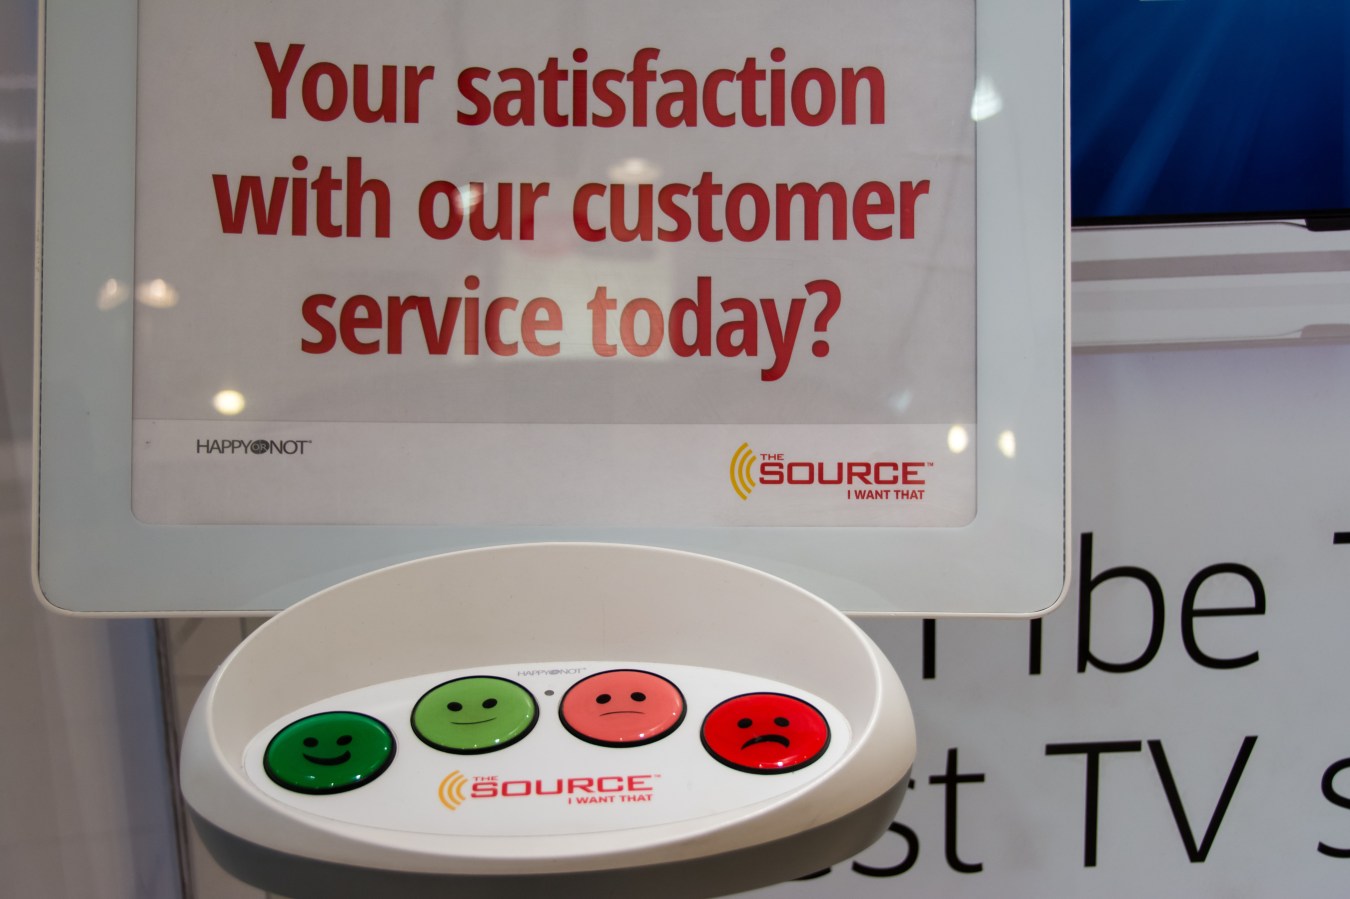 Measuring customer satisfaction in store: Colorful buttons with smiley faces, on a white plastic device that enables customers to give feedback about their level of customer service satisfaction